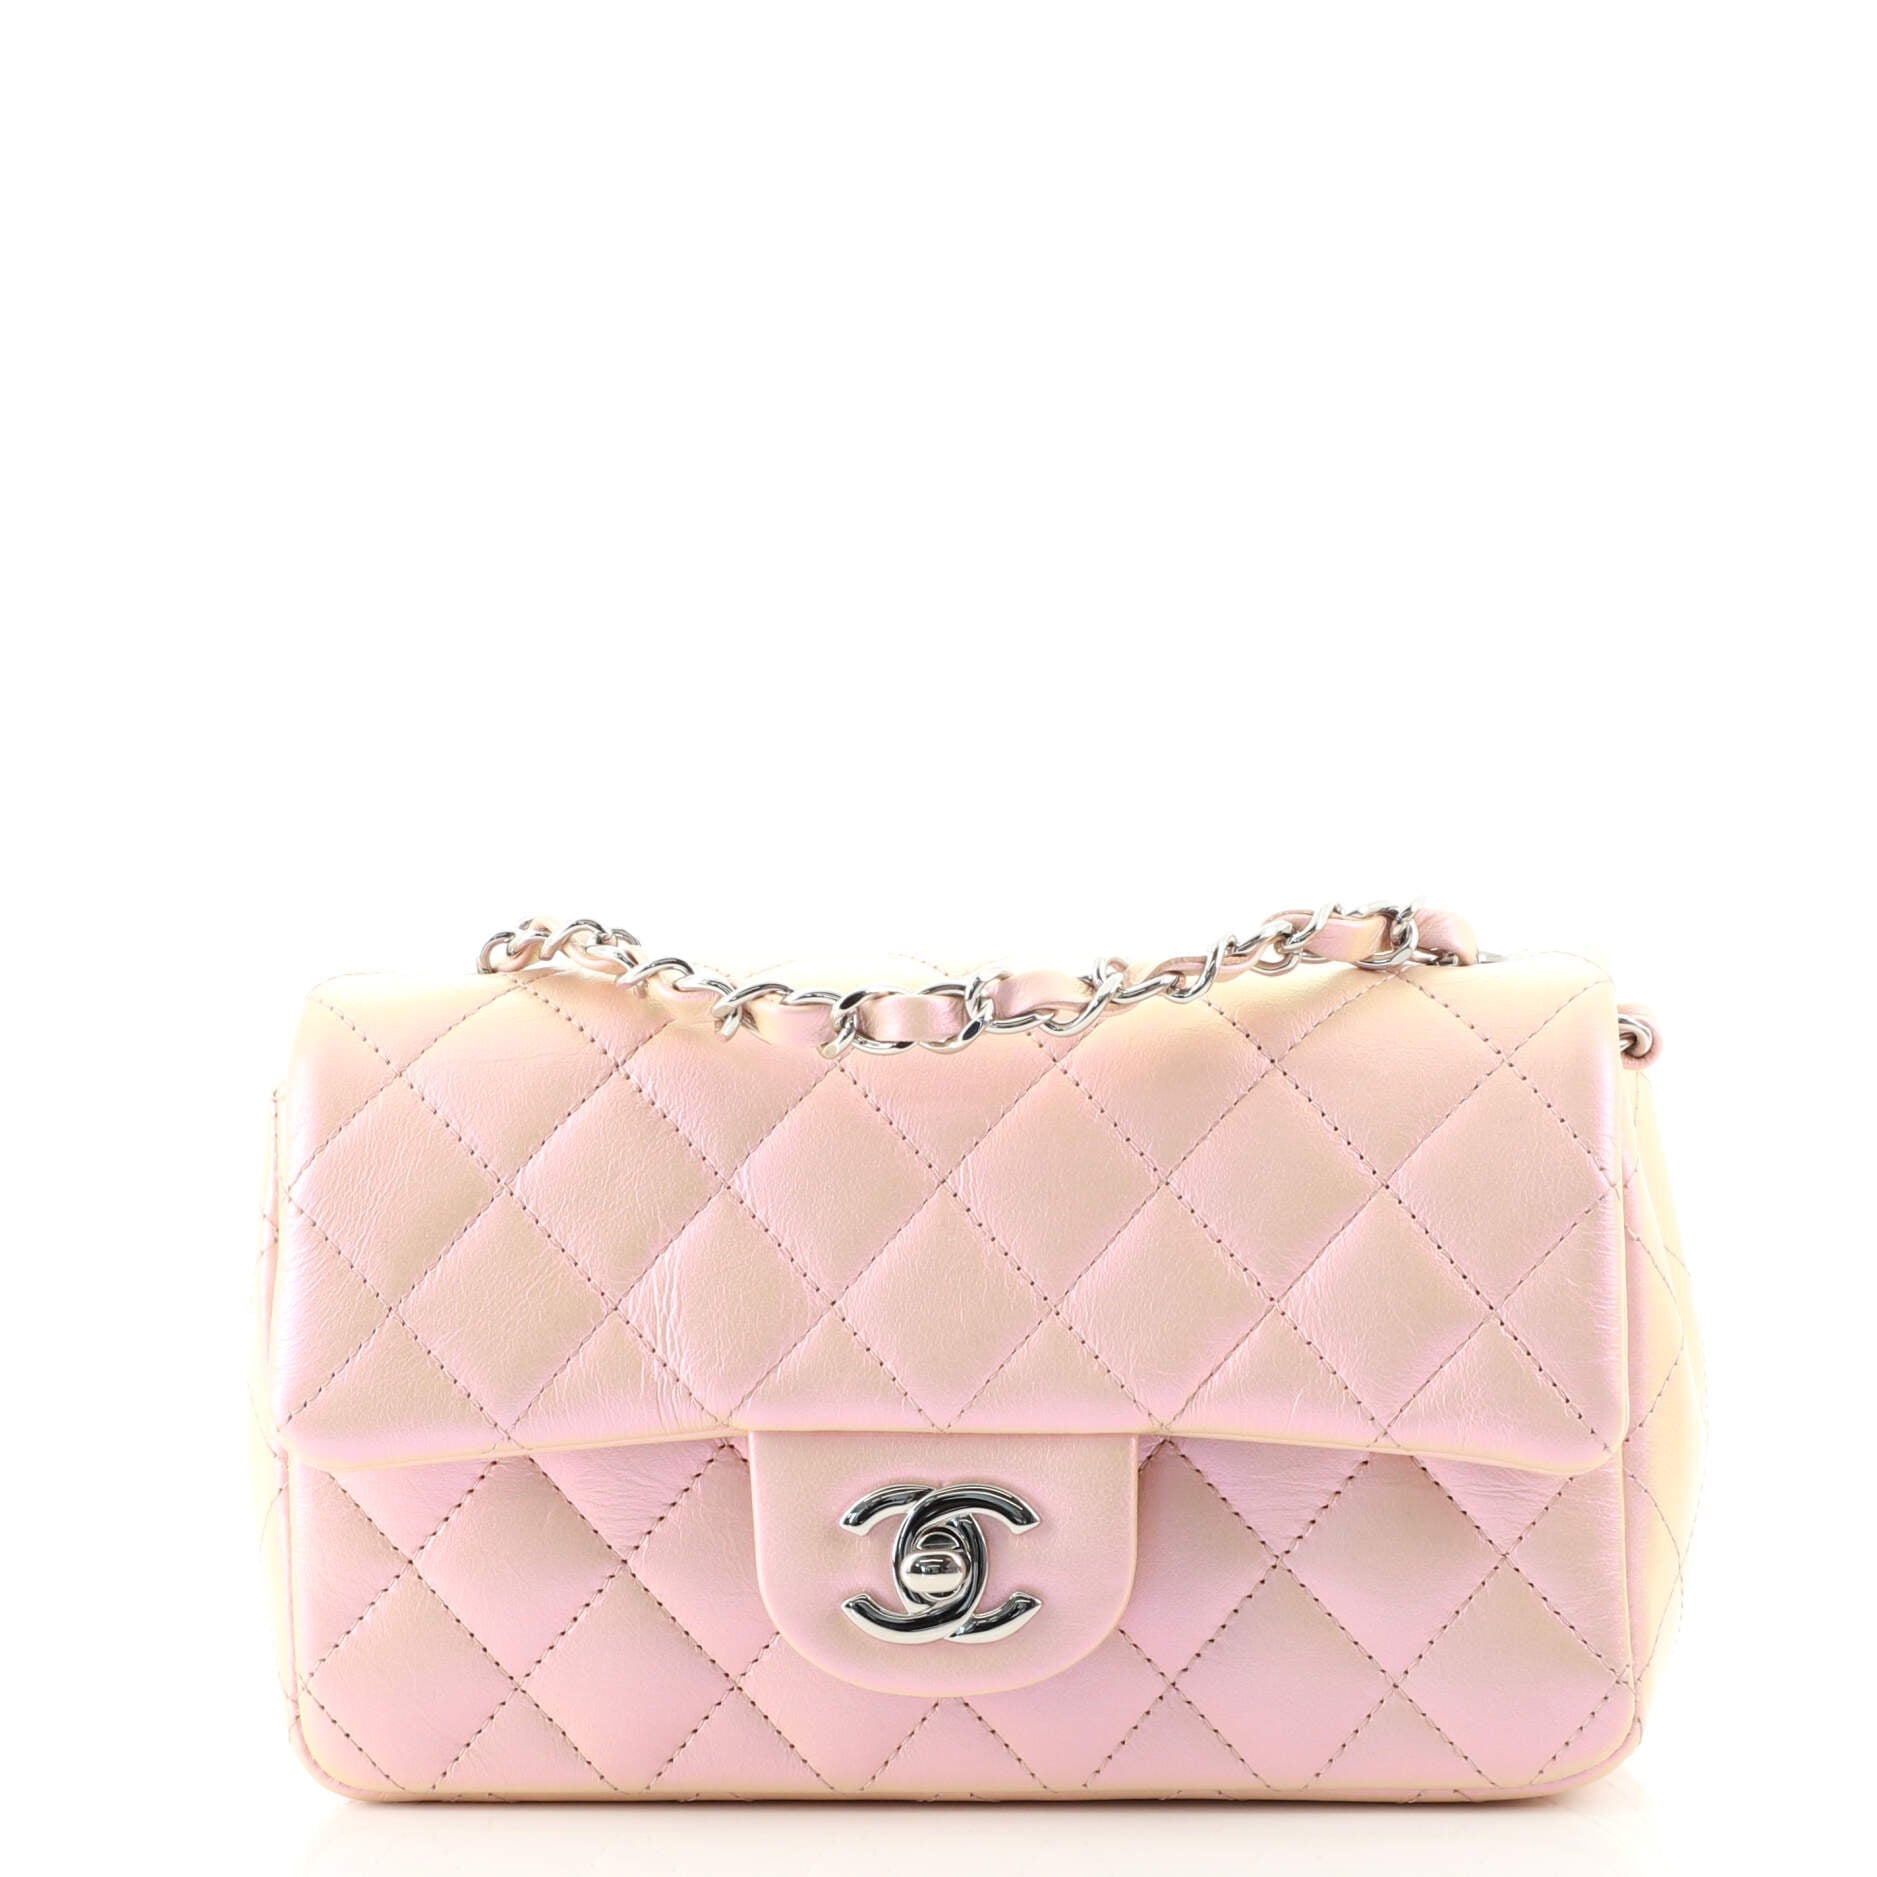 The most affordable Chanel bags! If Chanel and affordable can even